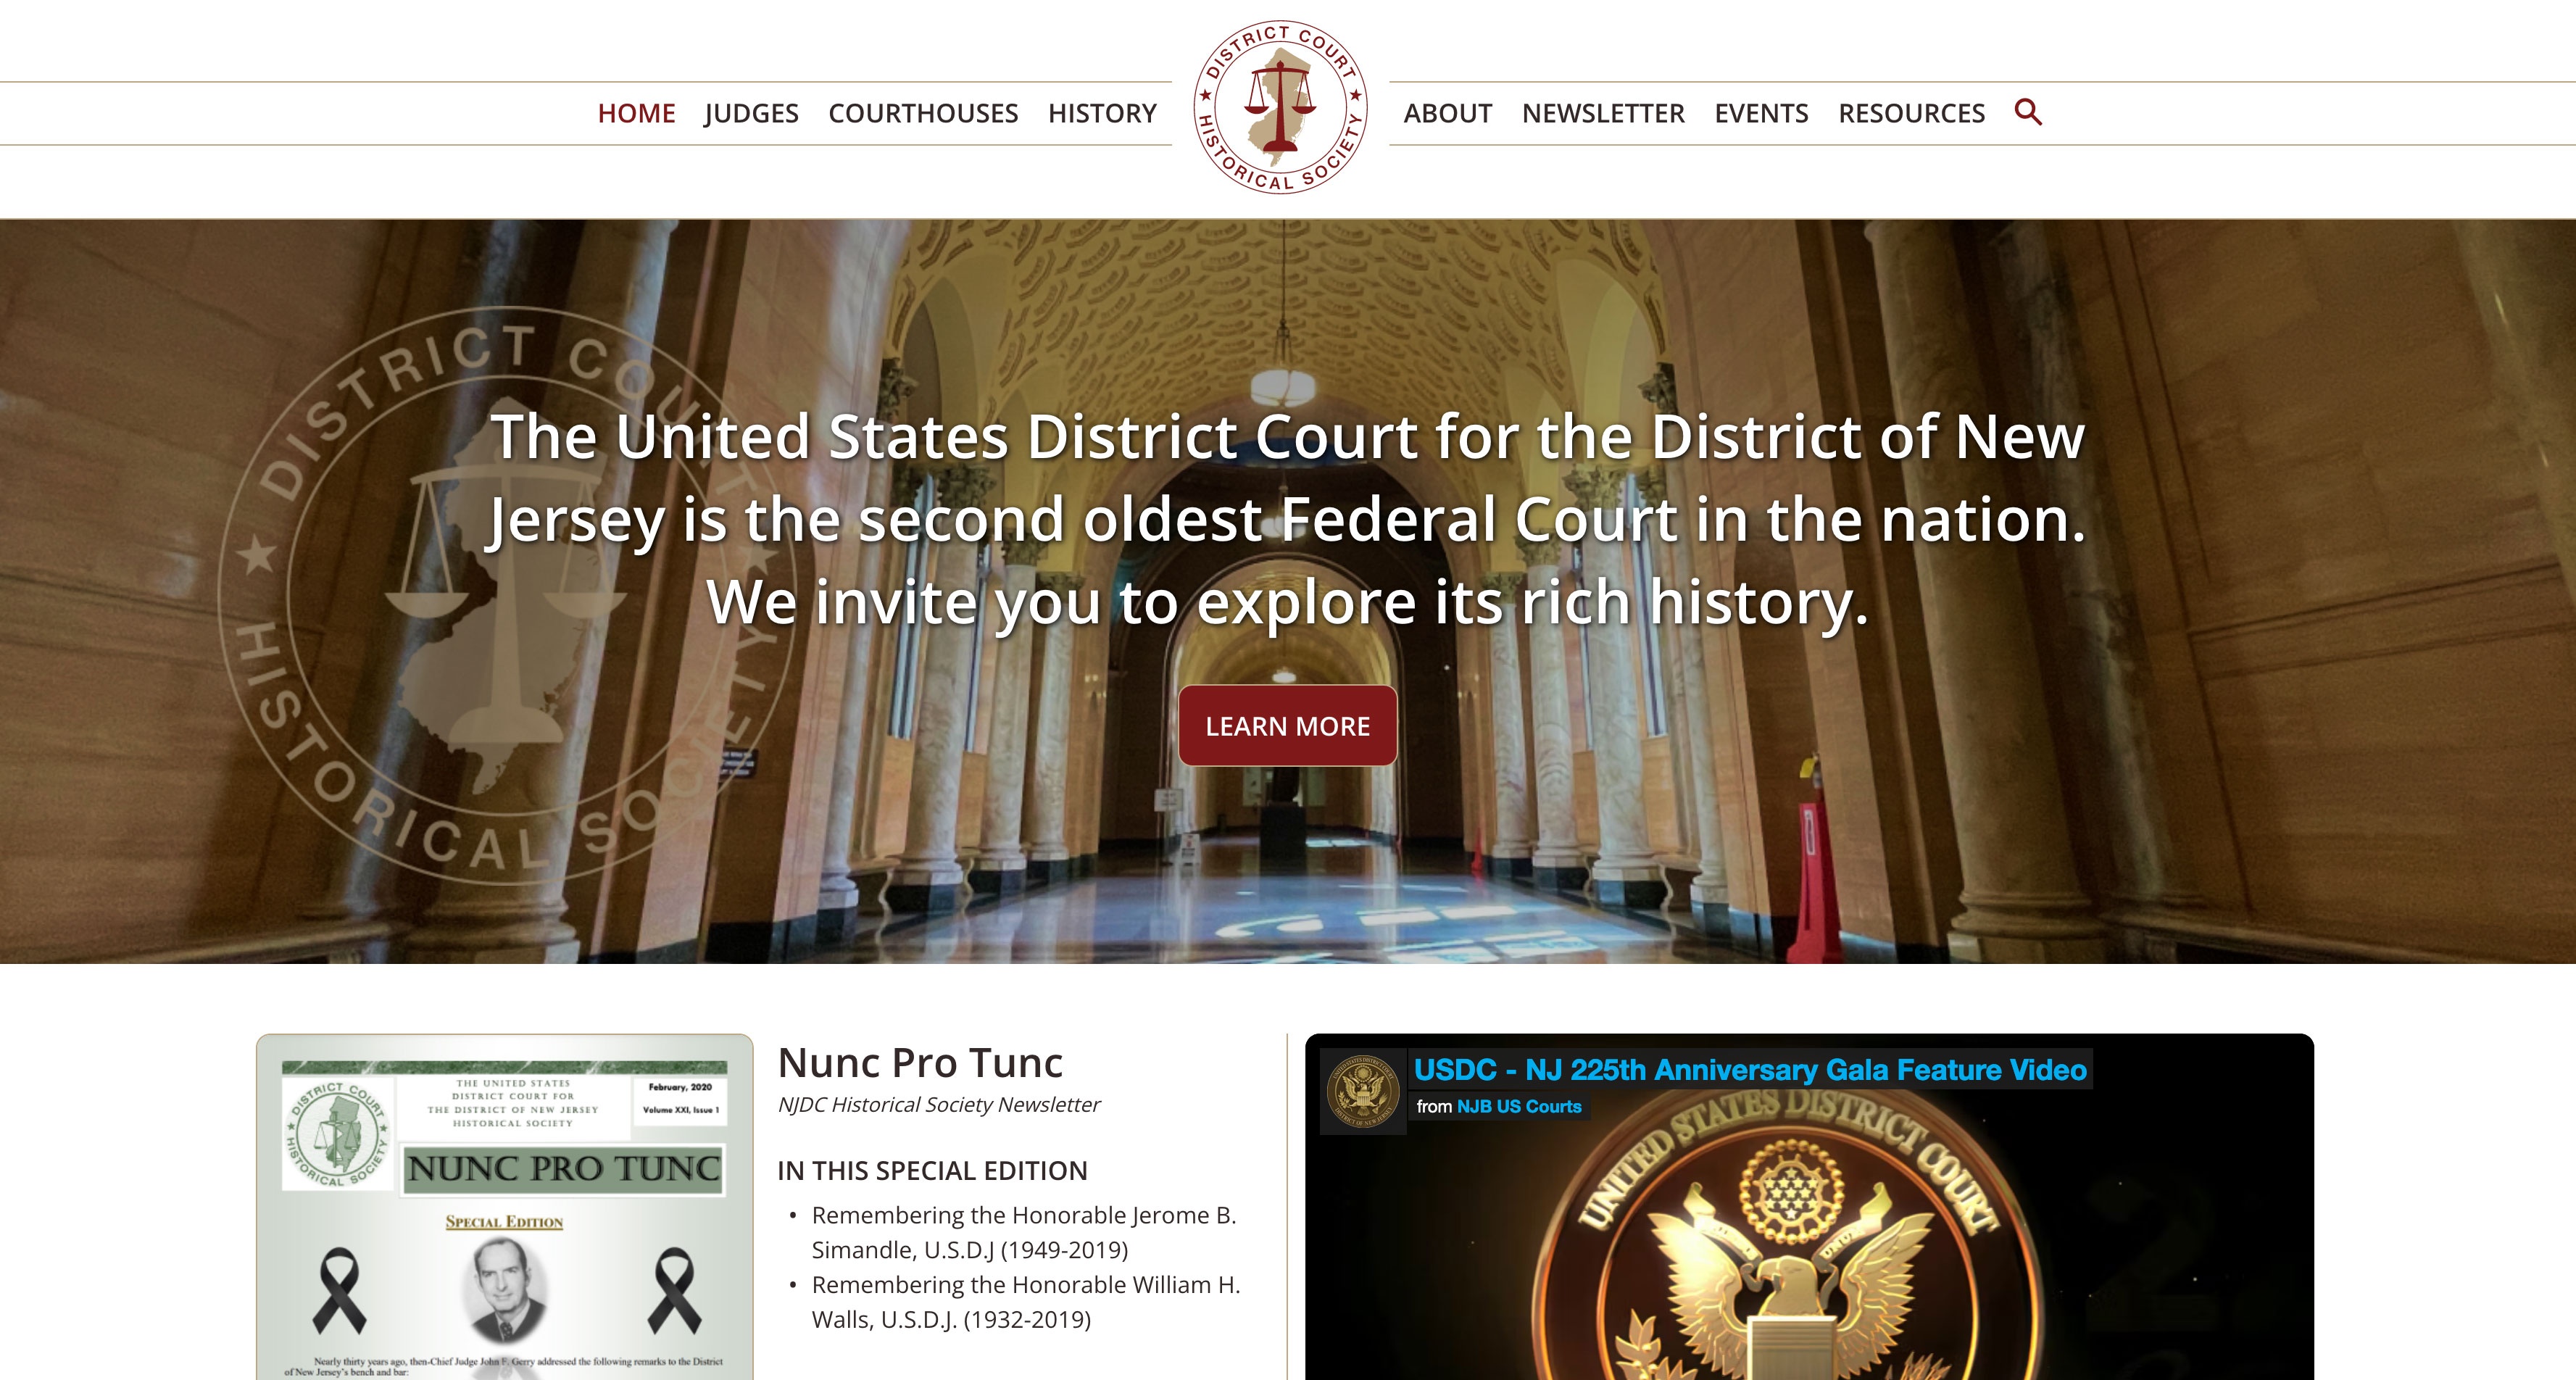 The Historical Society of the United States District Court for the District of New Jersey 01.jpg